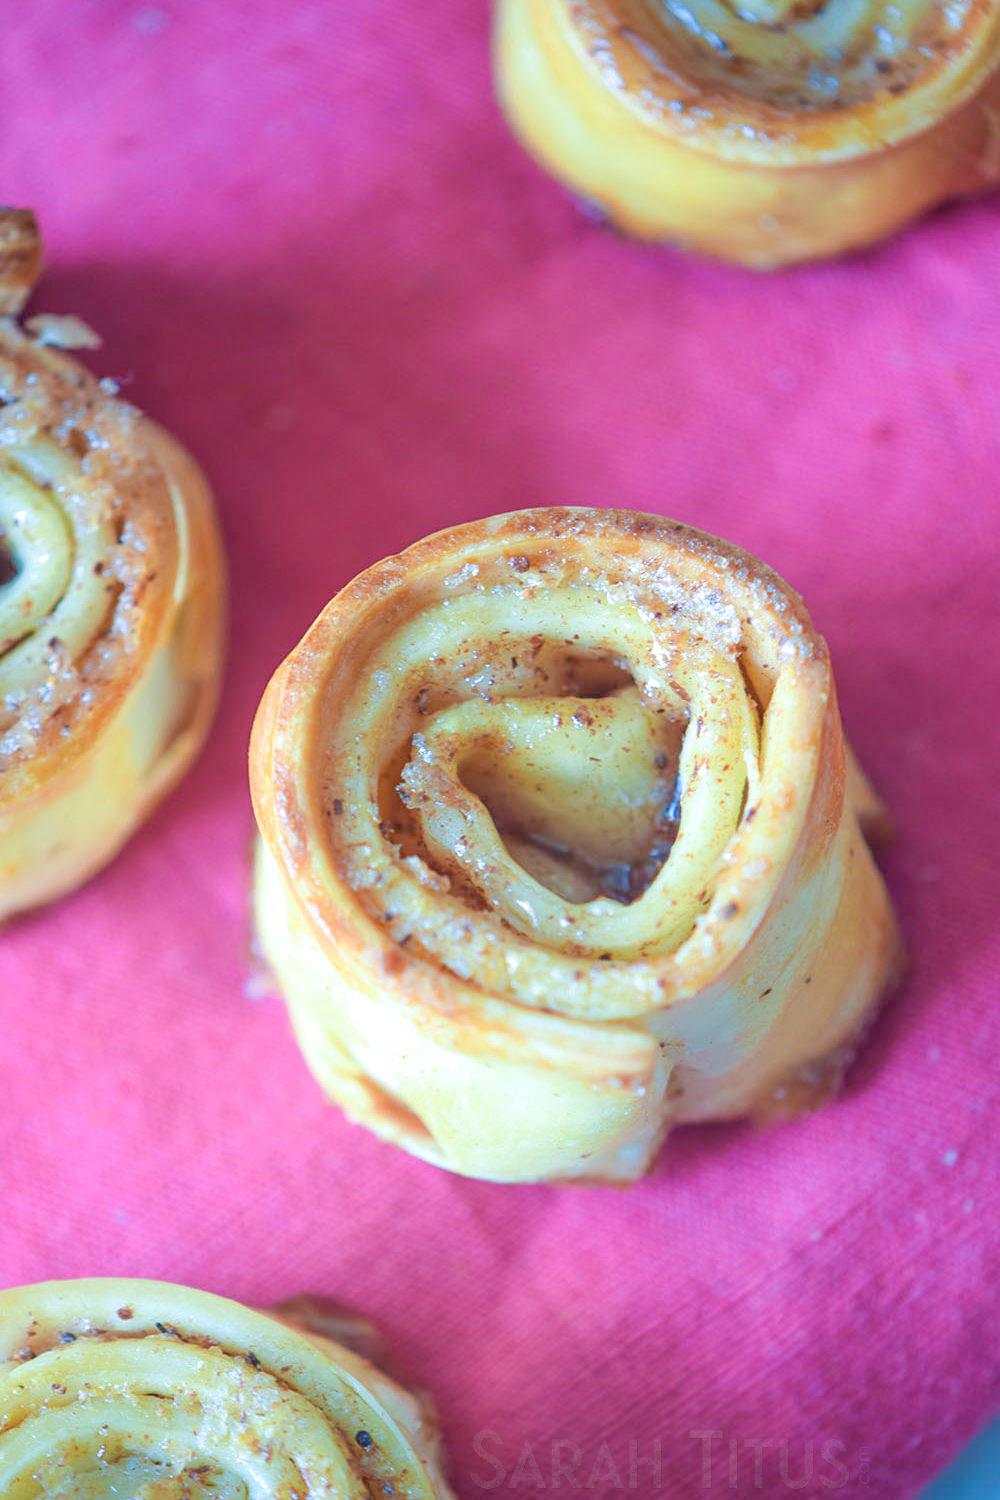 These Cinnamon Crescent Bites make for an easy to grab and go breakfast, or a great sweet treat for after dinner.